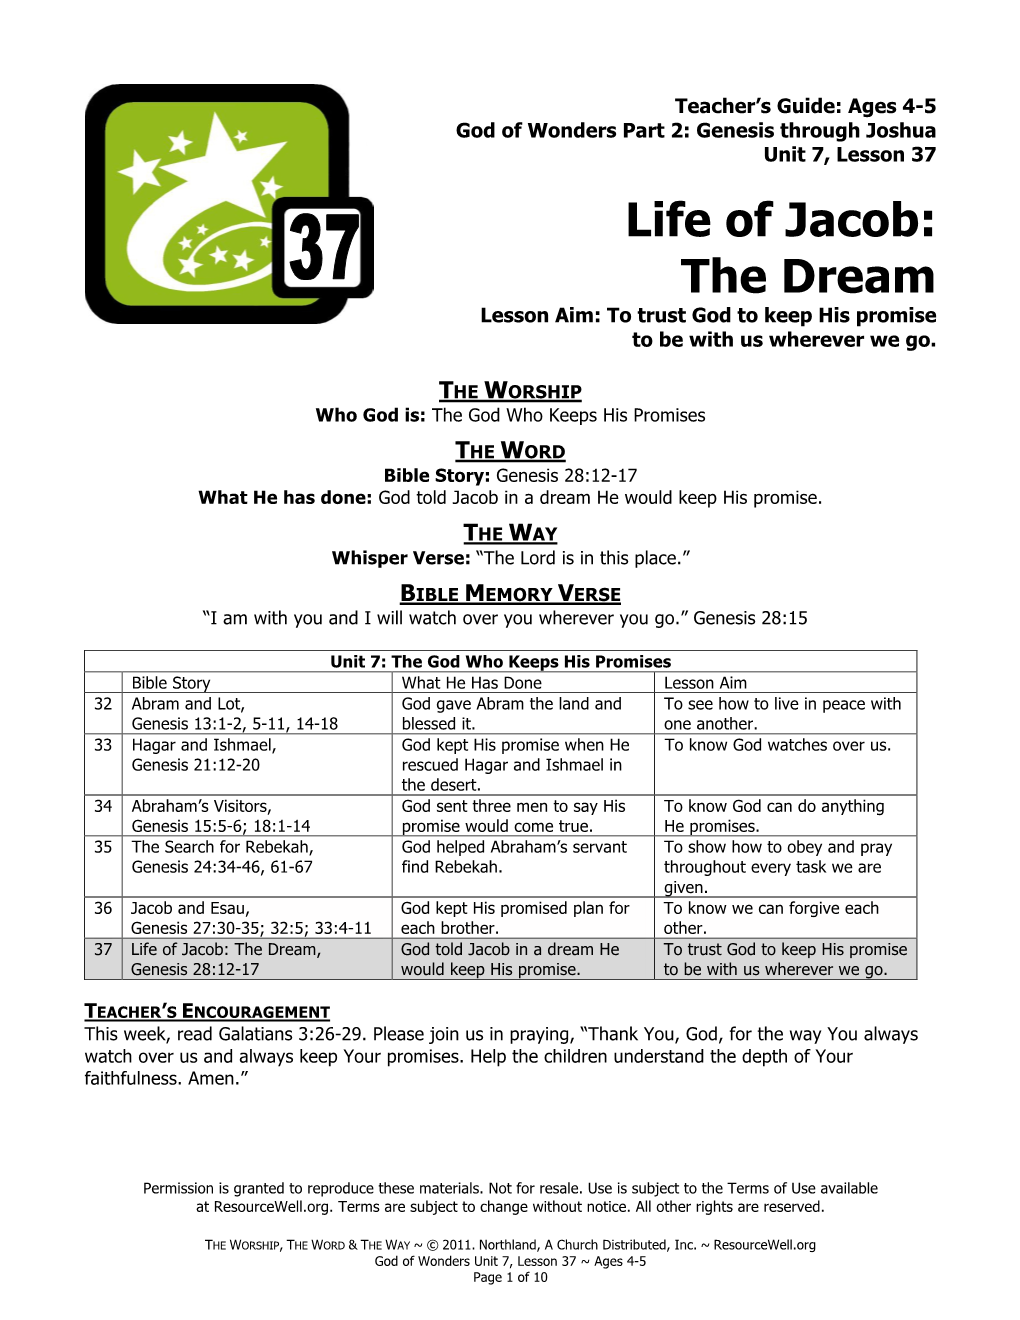 Life of Jacob: the Dream Lesson Aim: to Trust God to Keep His Promise to Be with Us Wherever We Go